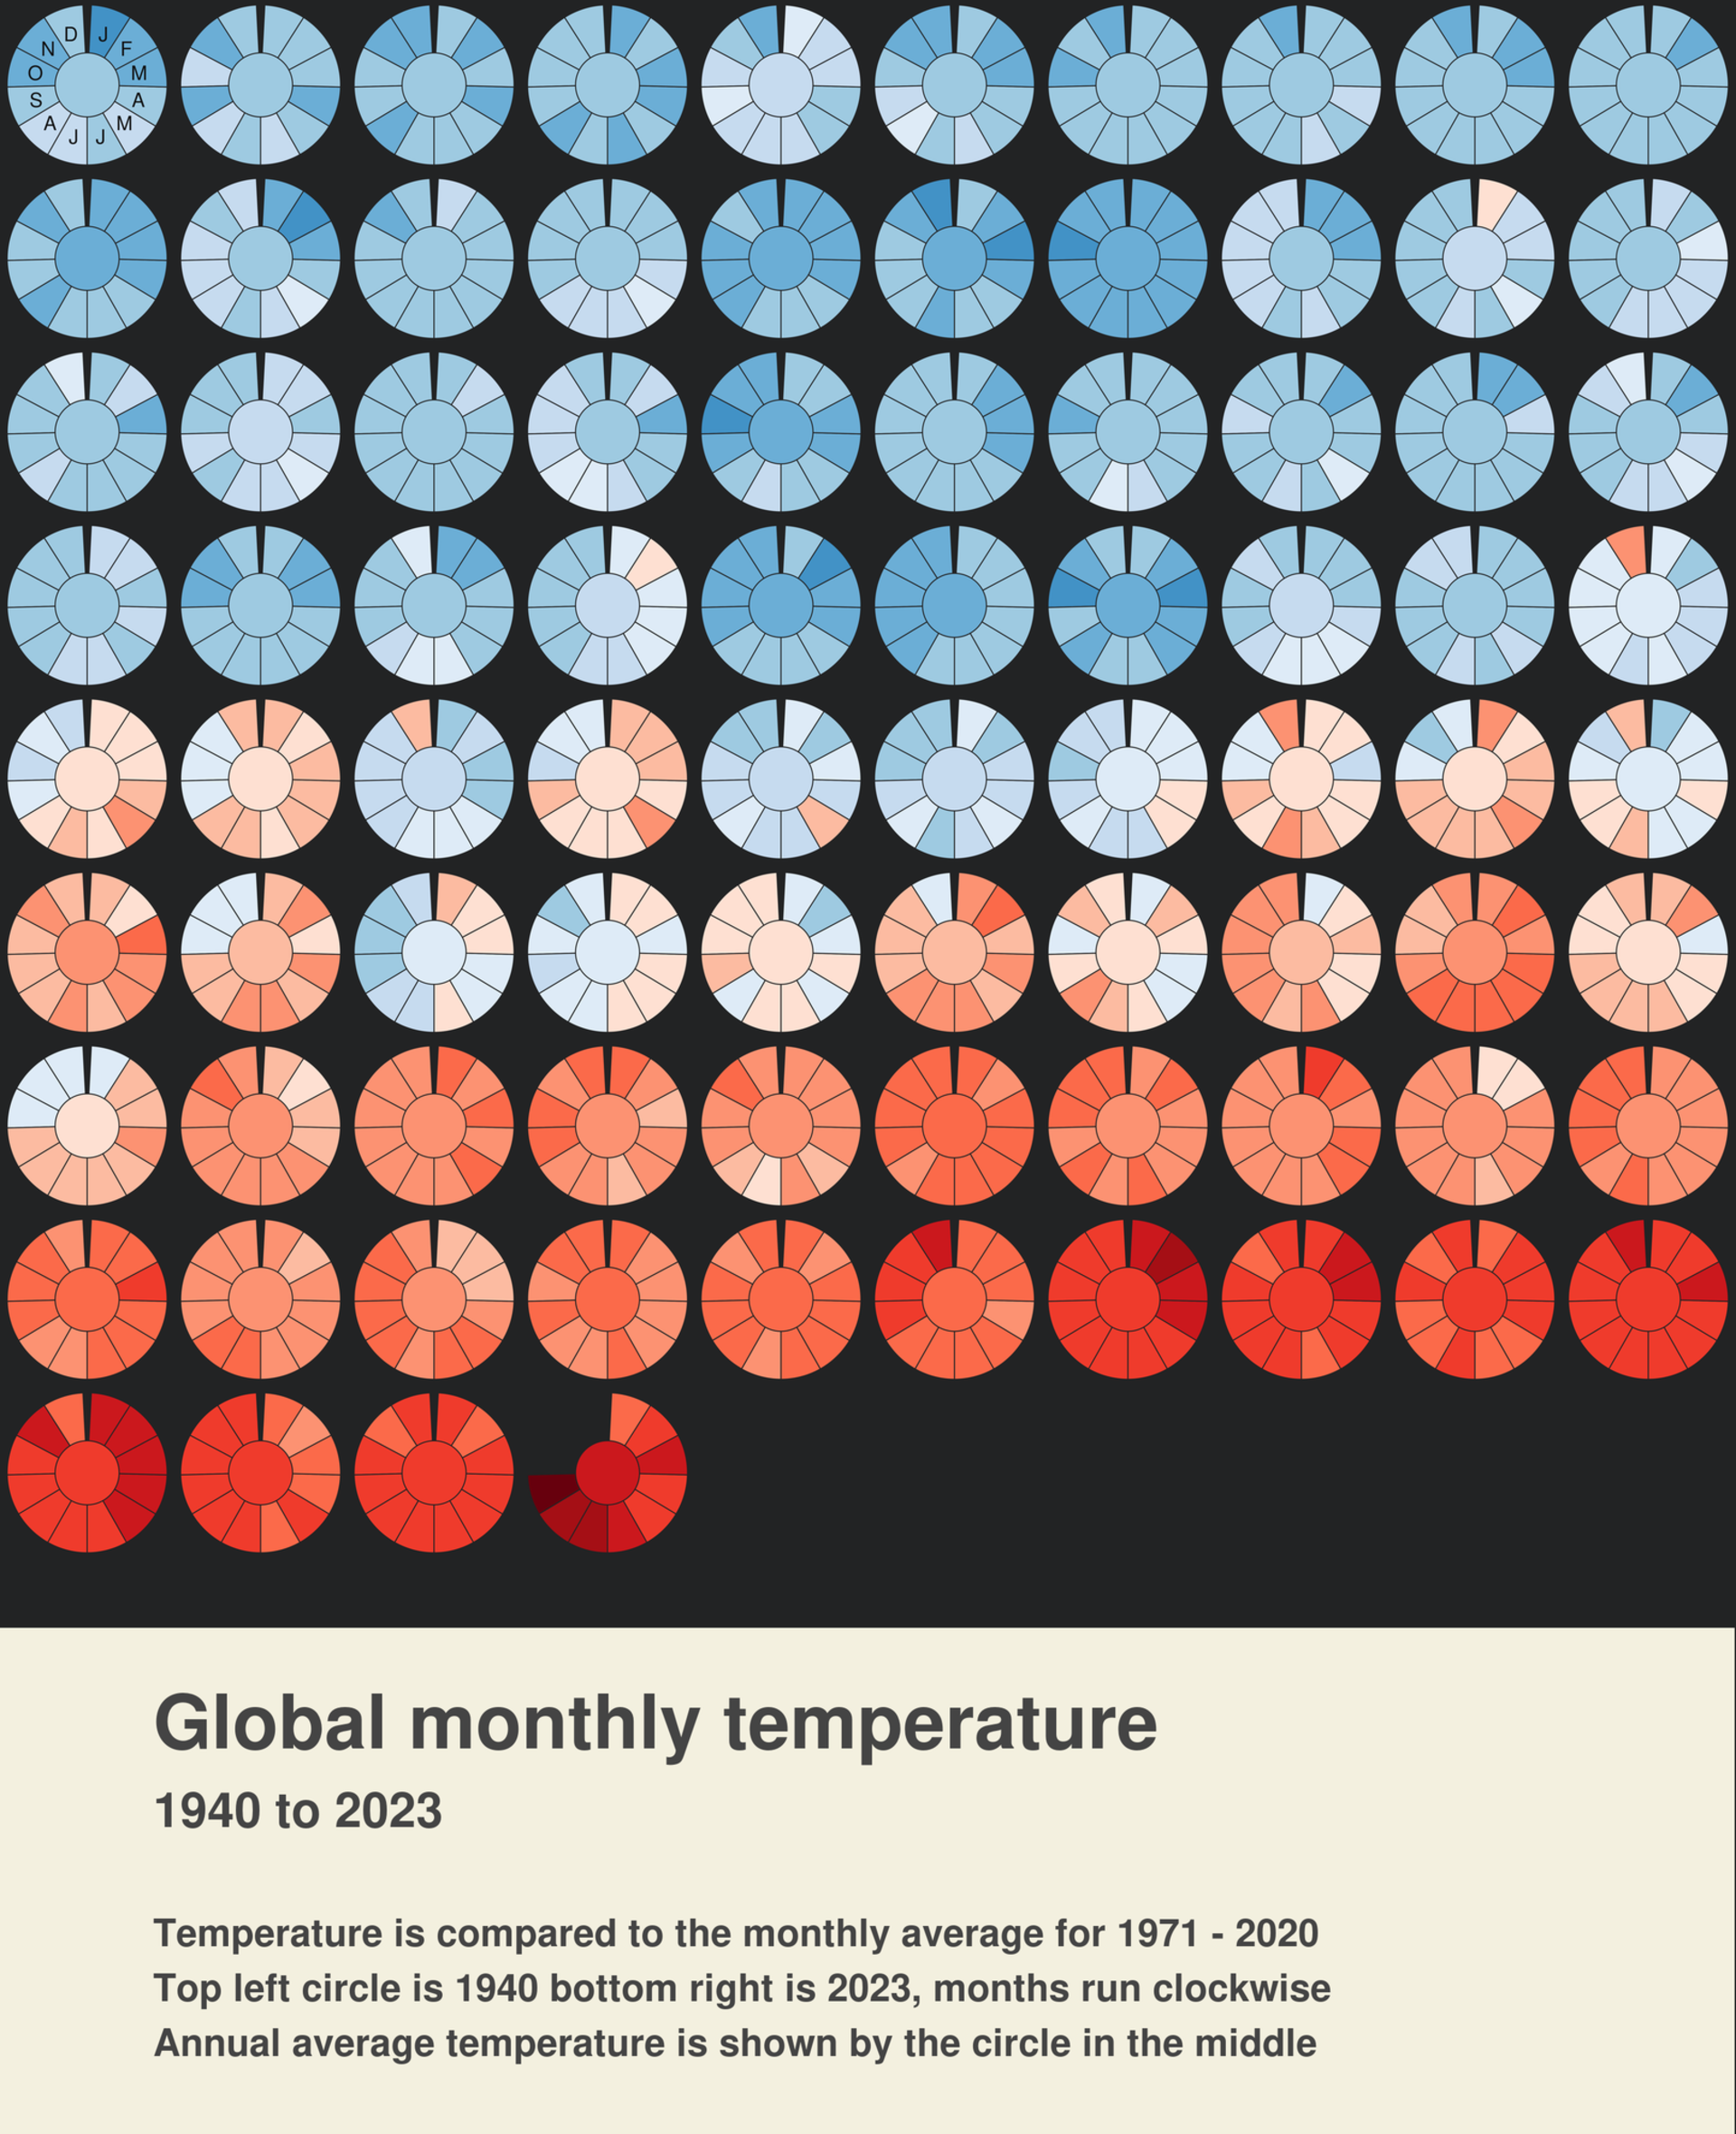 Global monthly temperature from 1940 to 2023